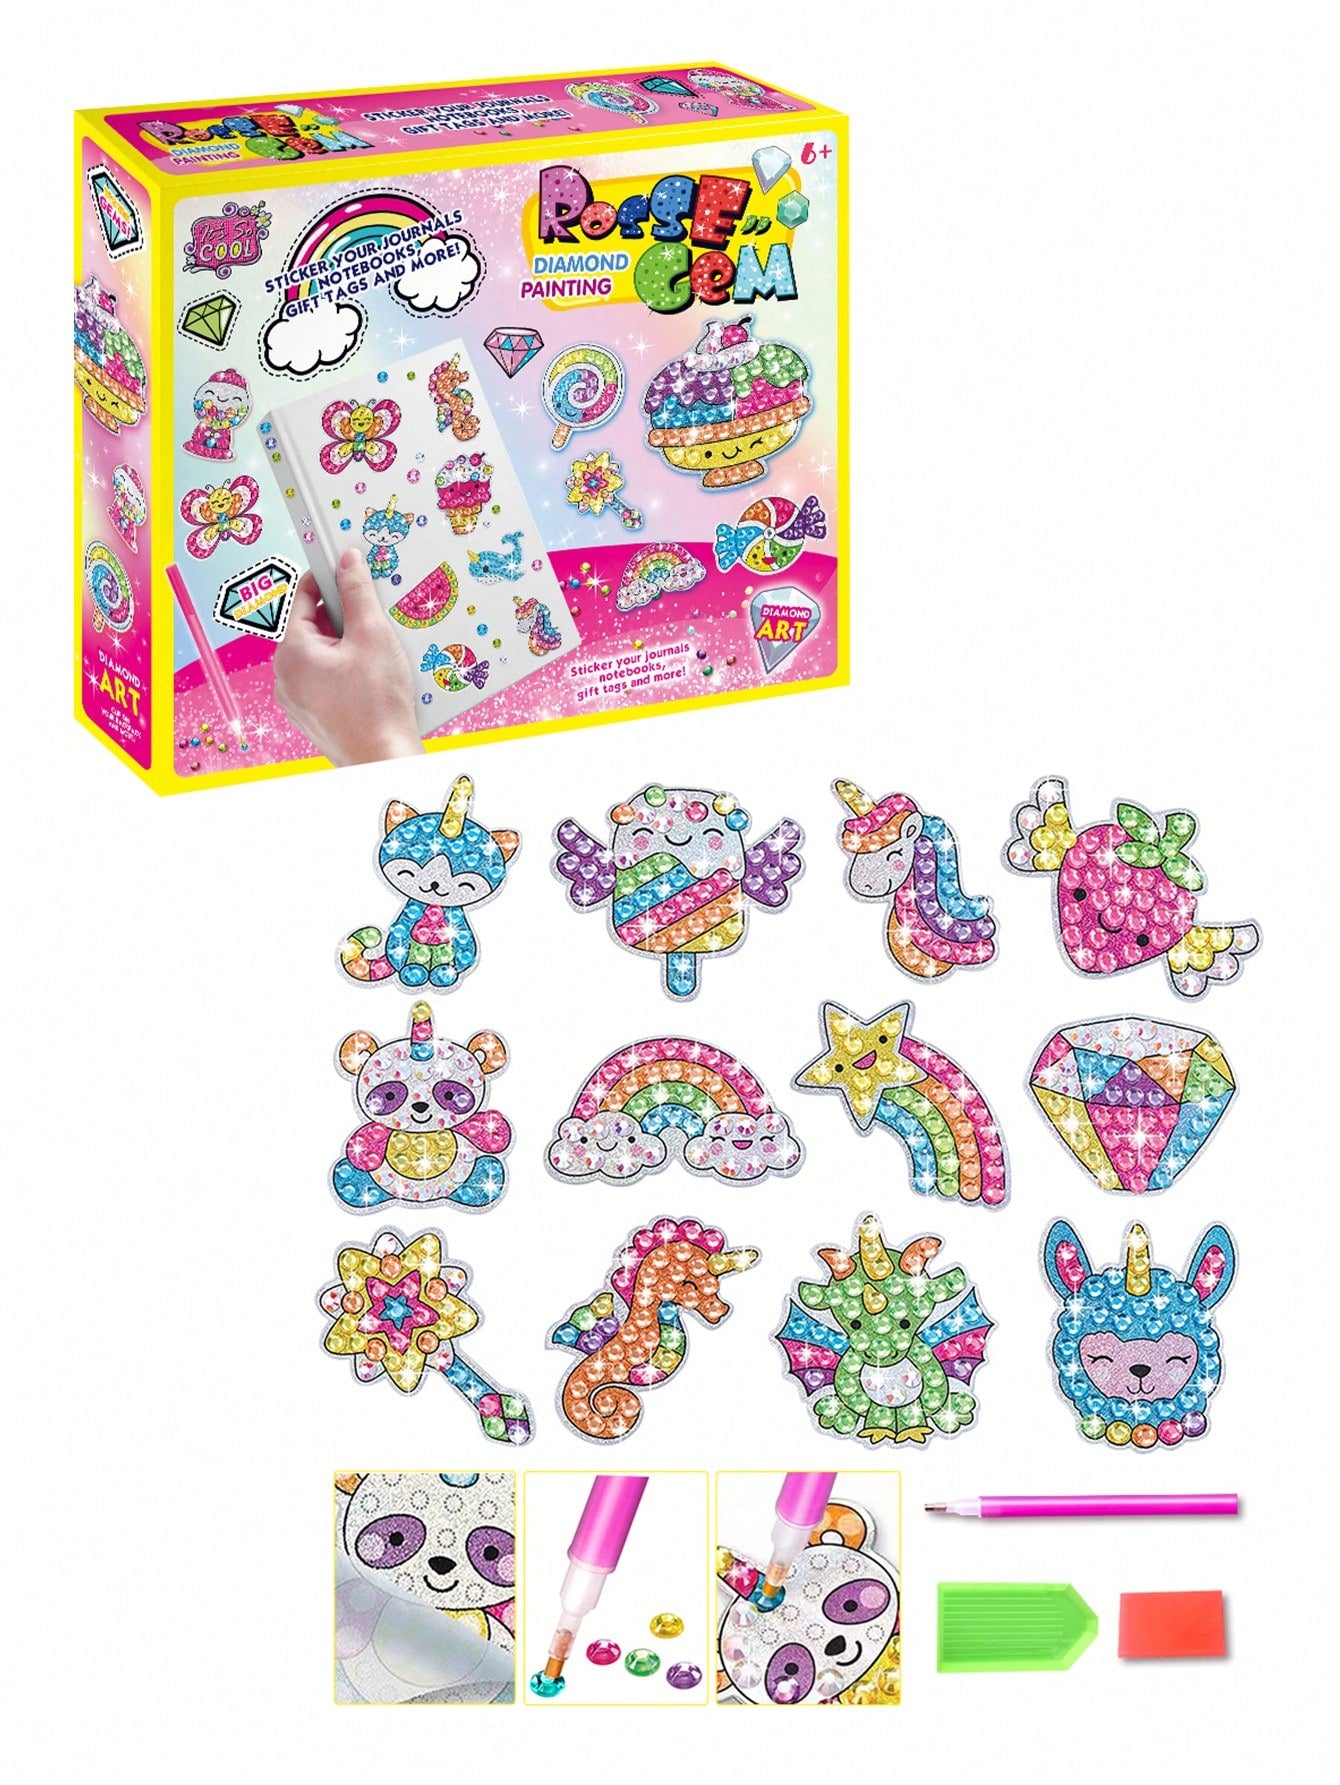 1set 5D Diamond Stickers Painting Kits For Kids 14pcs Gem Painting Stickers  And Suncatchers ,Create Your Own Magical Stickers,DIY Art Crafts For Girls  Kids Toddler And Beginners Age 3-12